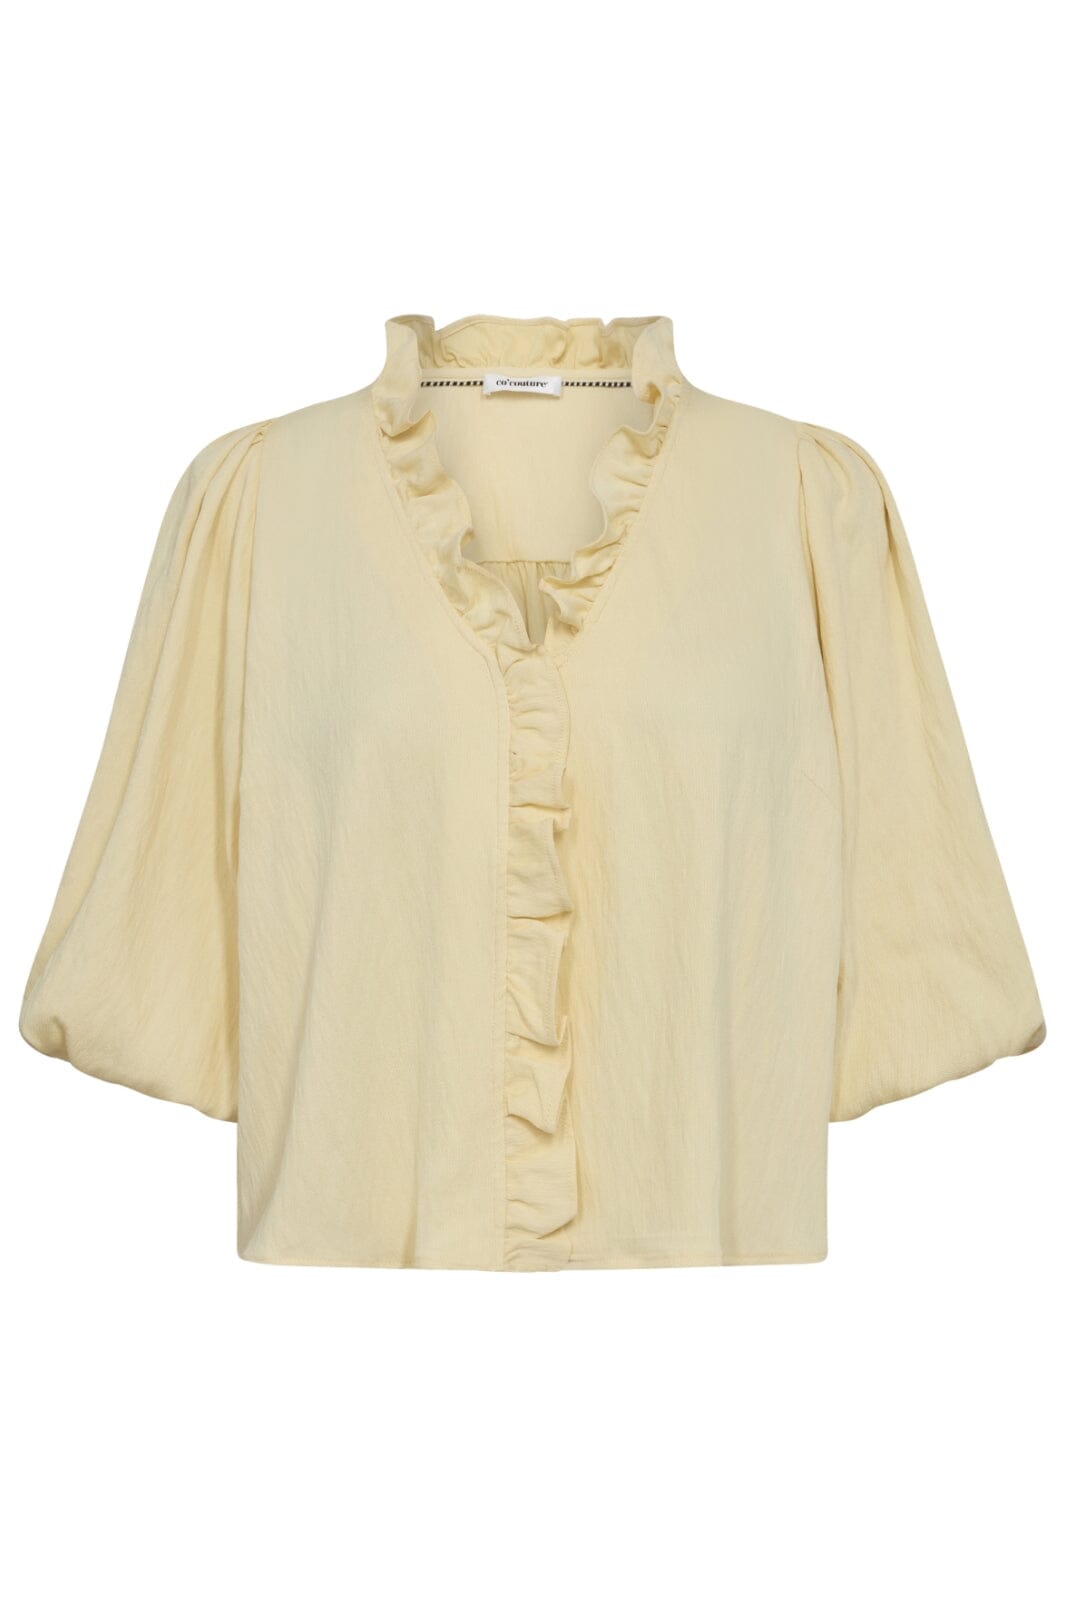 Co´couture - Suedacc Puff Ss Blouse 35442 - 6421 Pale Yellow Bluser 